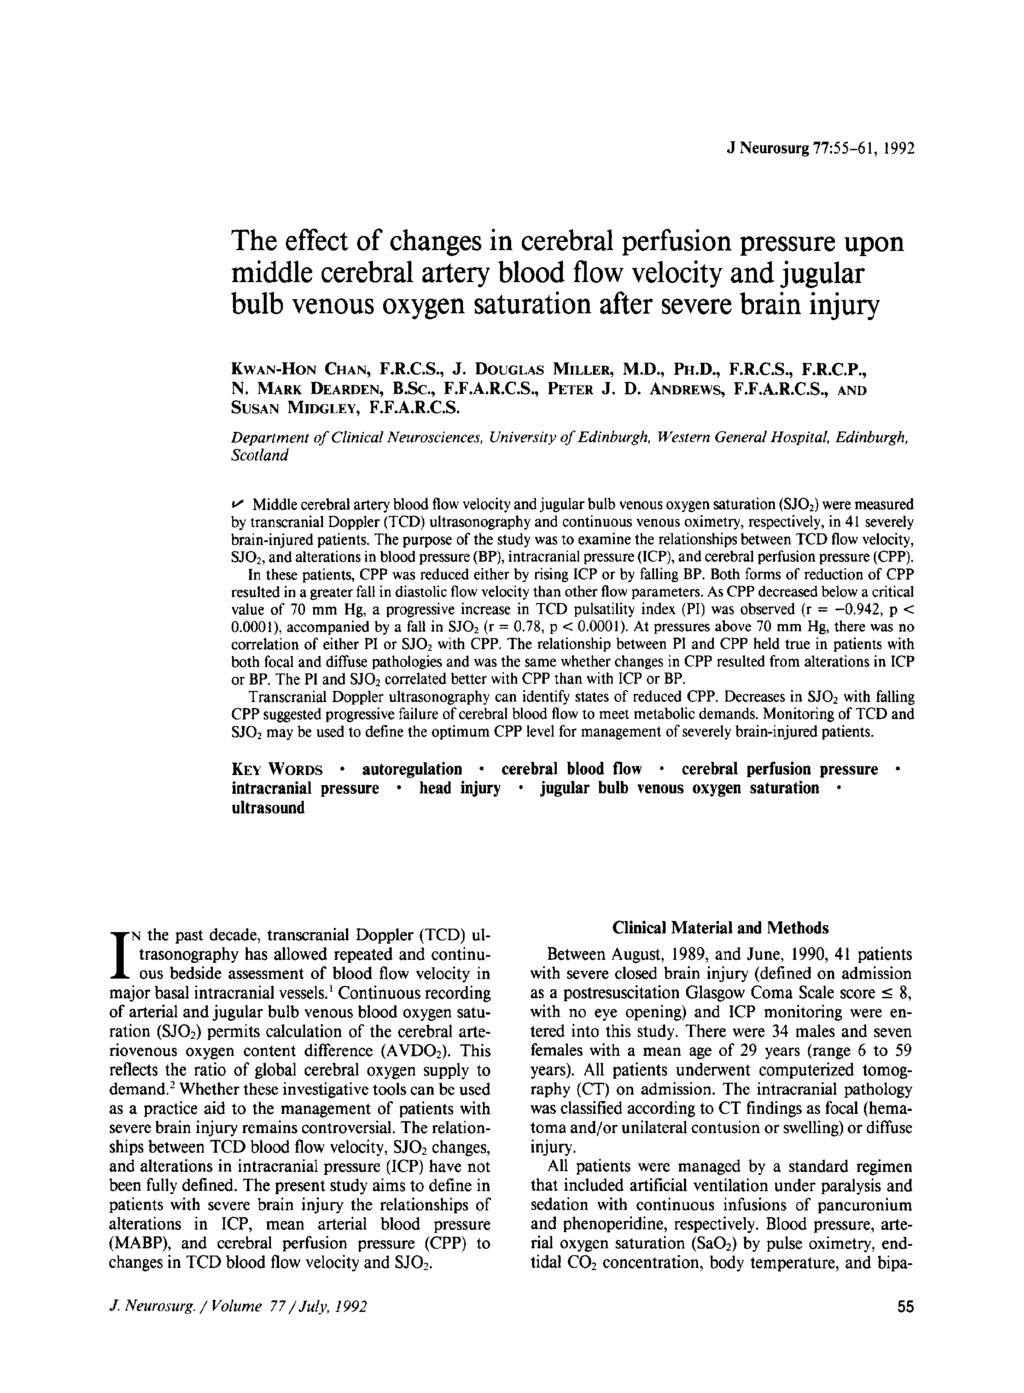 J Neurosurg 77:55-61, 1992 The effect of changes in cerebral perfusion pressure upon middle cerebral artery blood flow velocity and jugular bulb venous oxygen saturation after severe brain injury